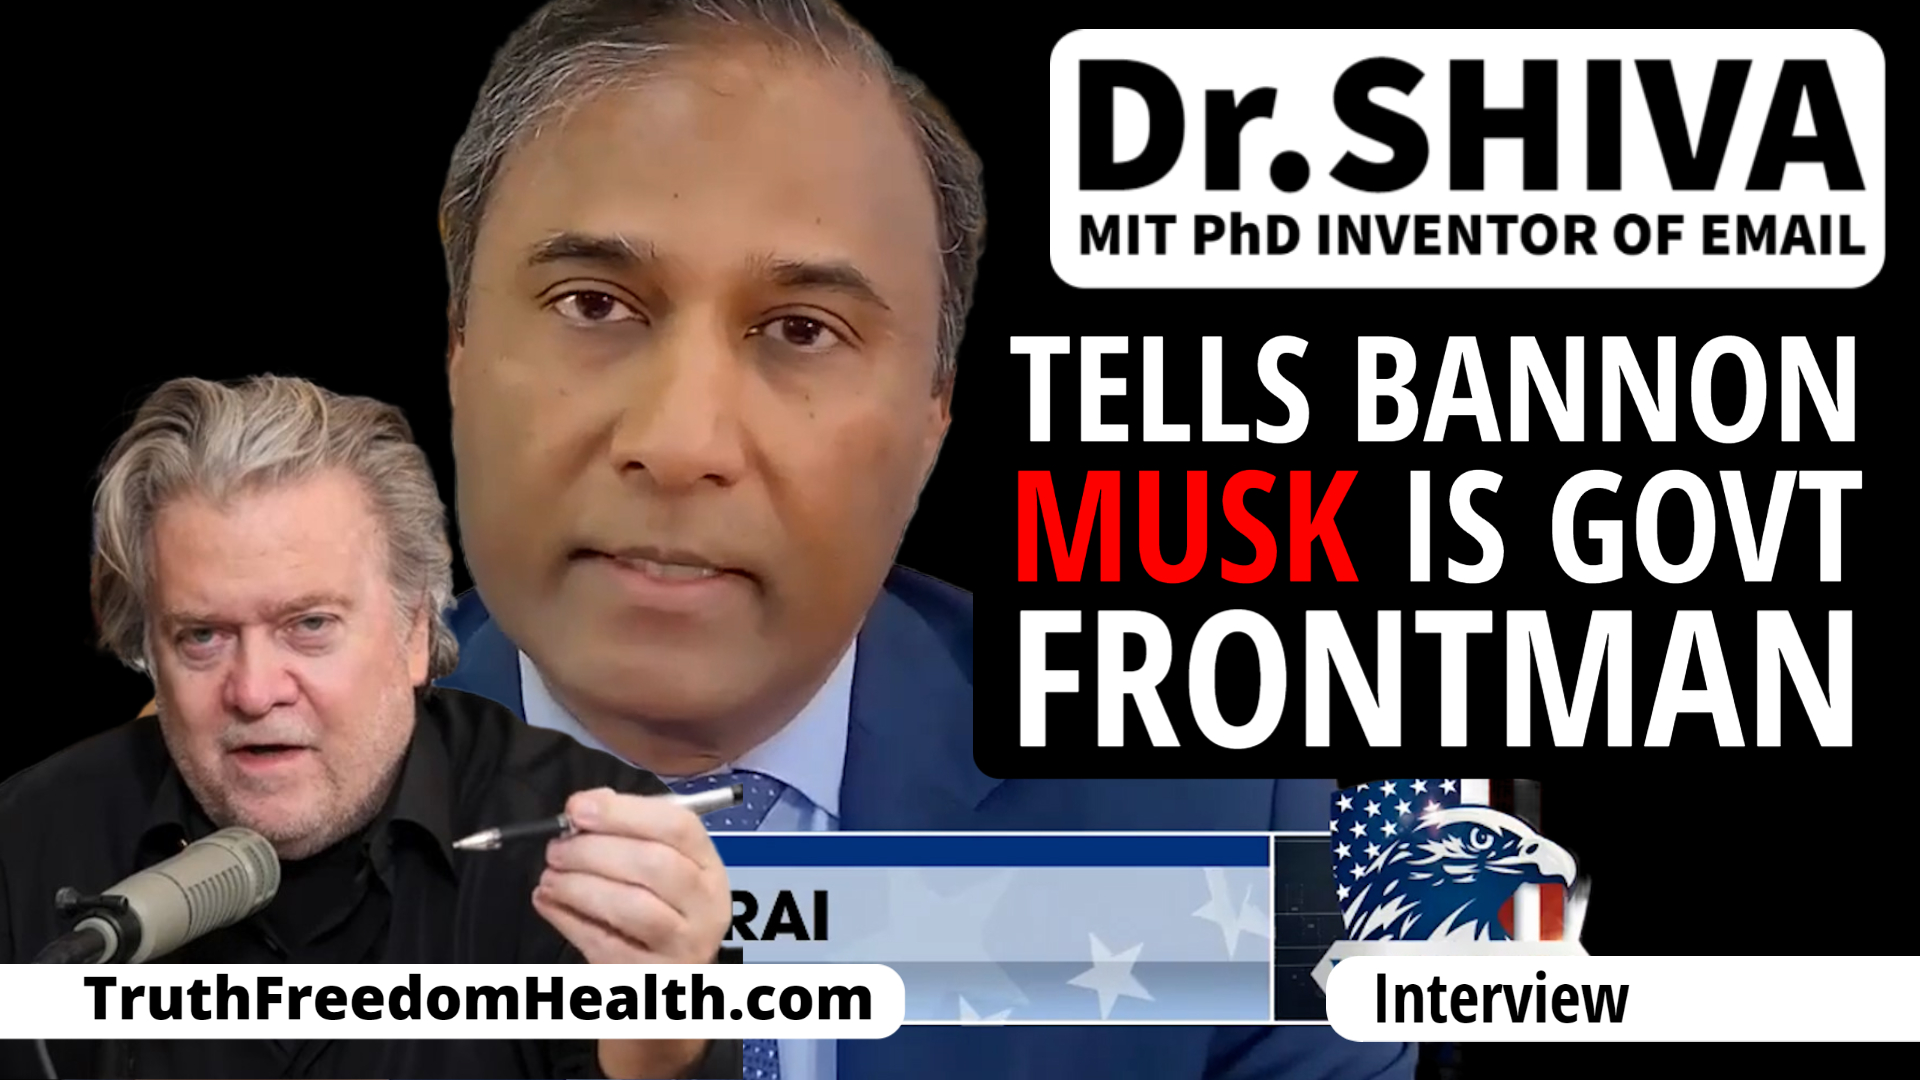 Dr.SHIVA Blasts Musk, Conservative Influencers As ‘Controlled Opposition’ In Fight For Free Speech - Interviewed by Steve Bannon